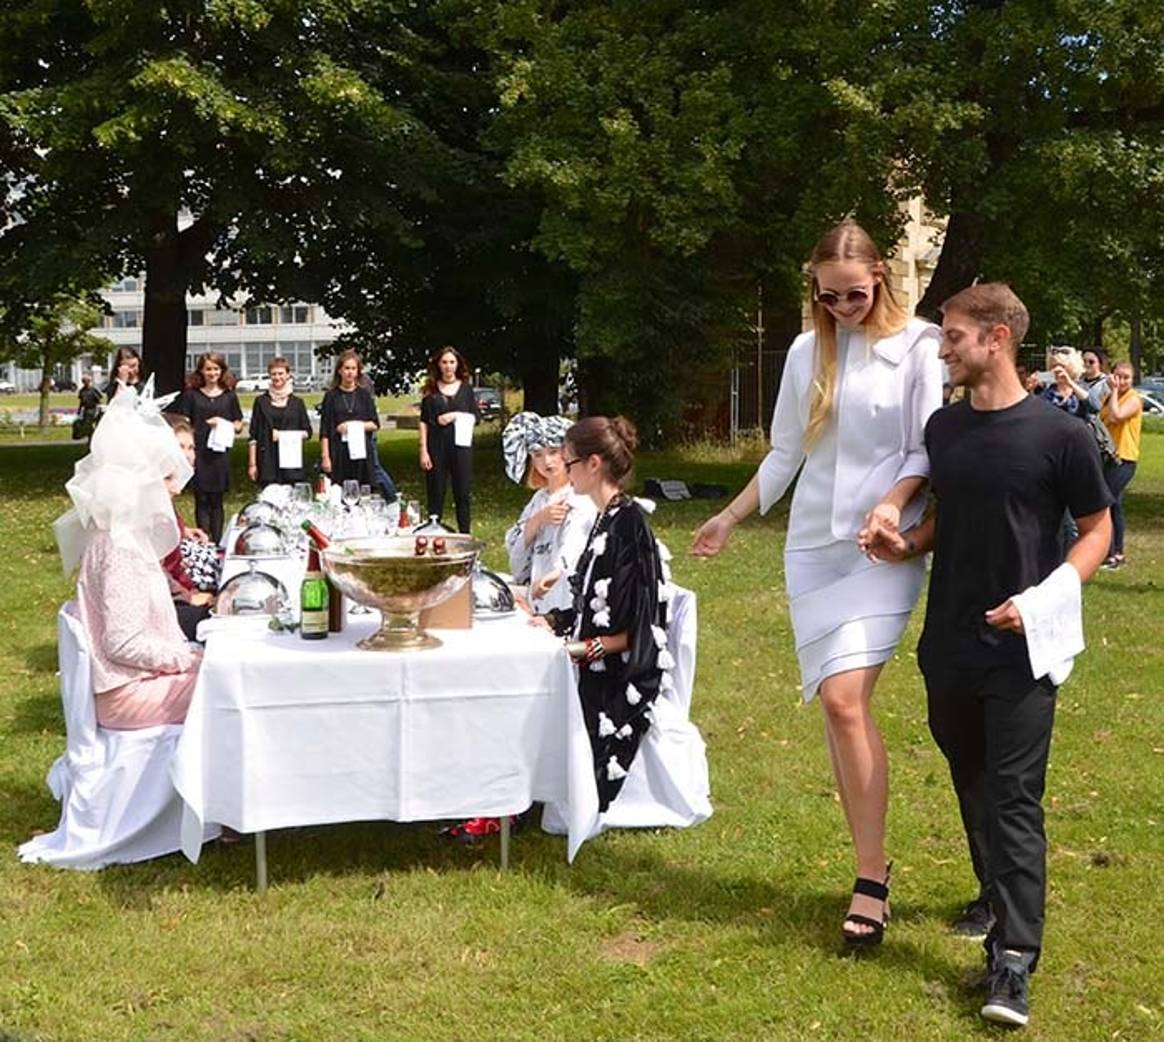 In picture: 'Fashion-picnic' at FH Dresden